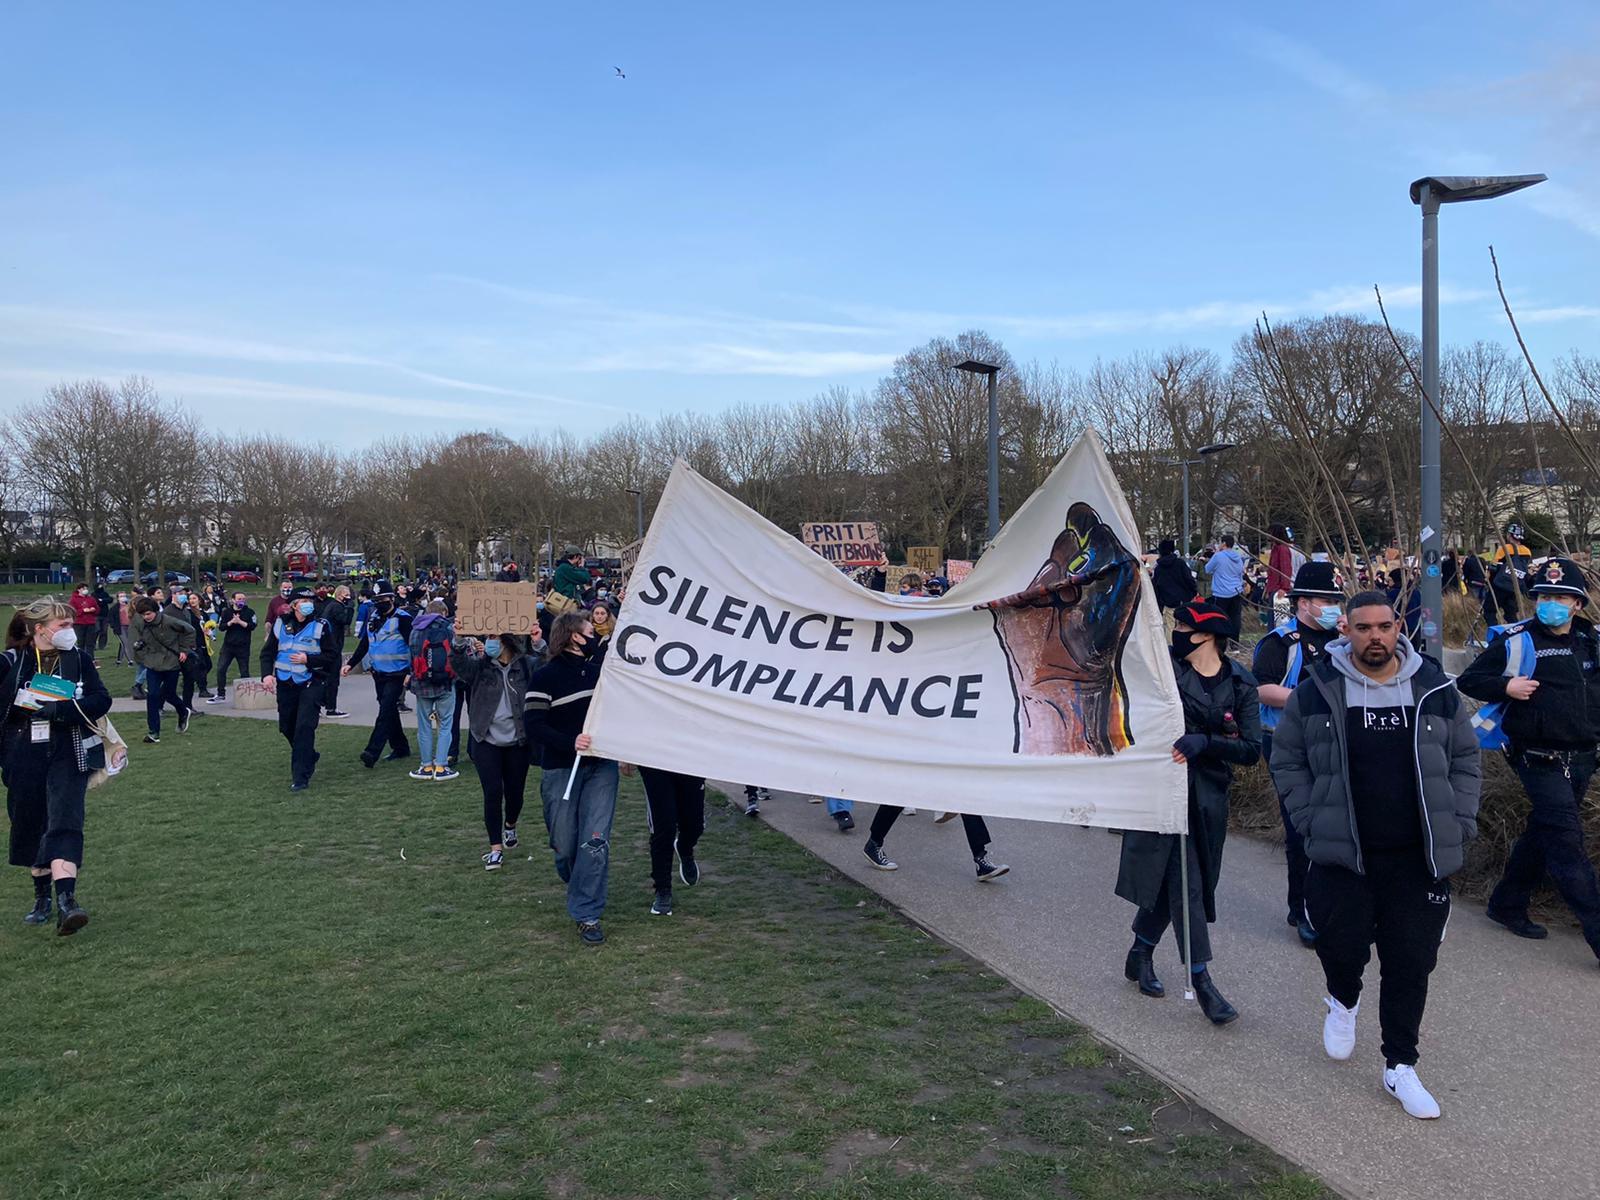 In pictures: hundreds took to the streets of Brighton to take part in a Kill the Bill protest, opposing the governments new Police, Crime, Sentencing and Courts bill which would grant police powers to restrict future demonstrations